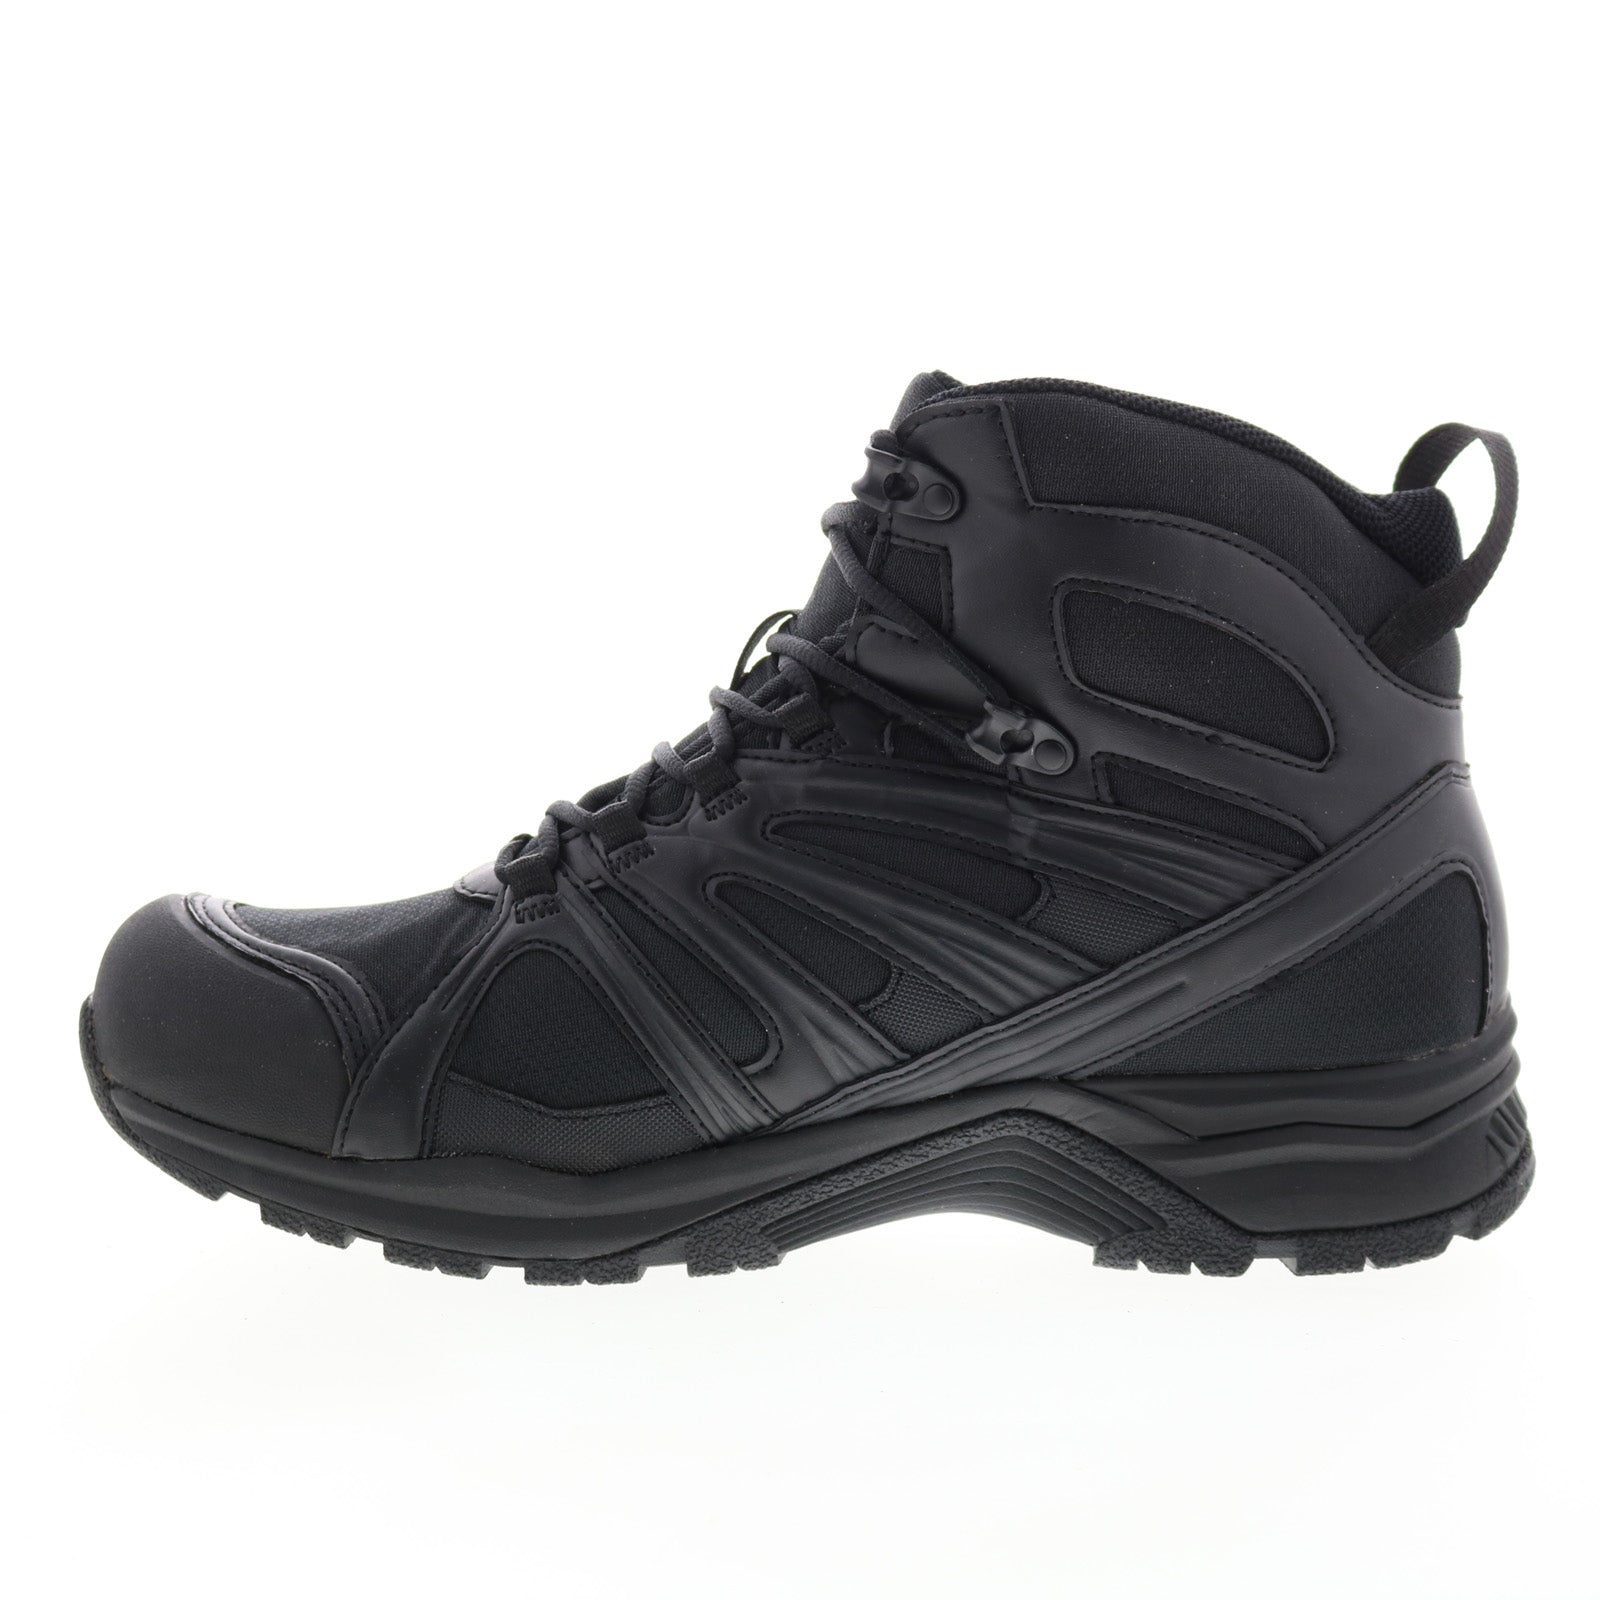 Altama Aboottabad Trail Mid WP 353201 Mens Black Wide Tactical